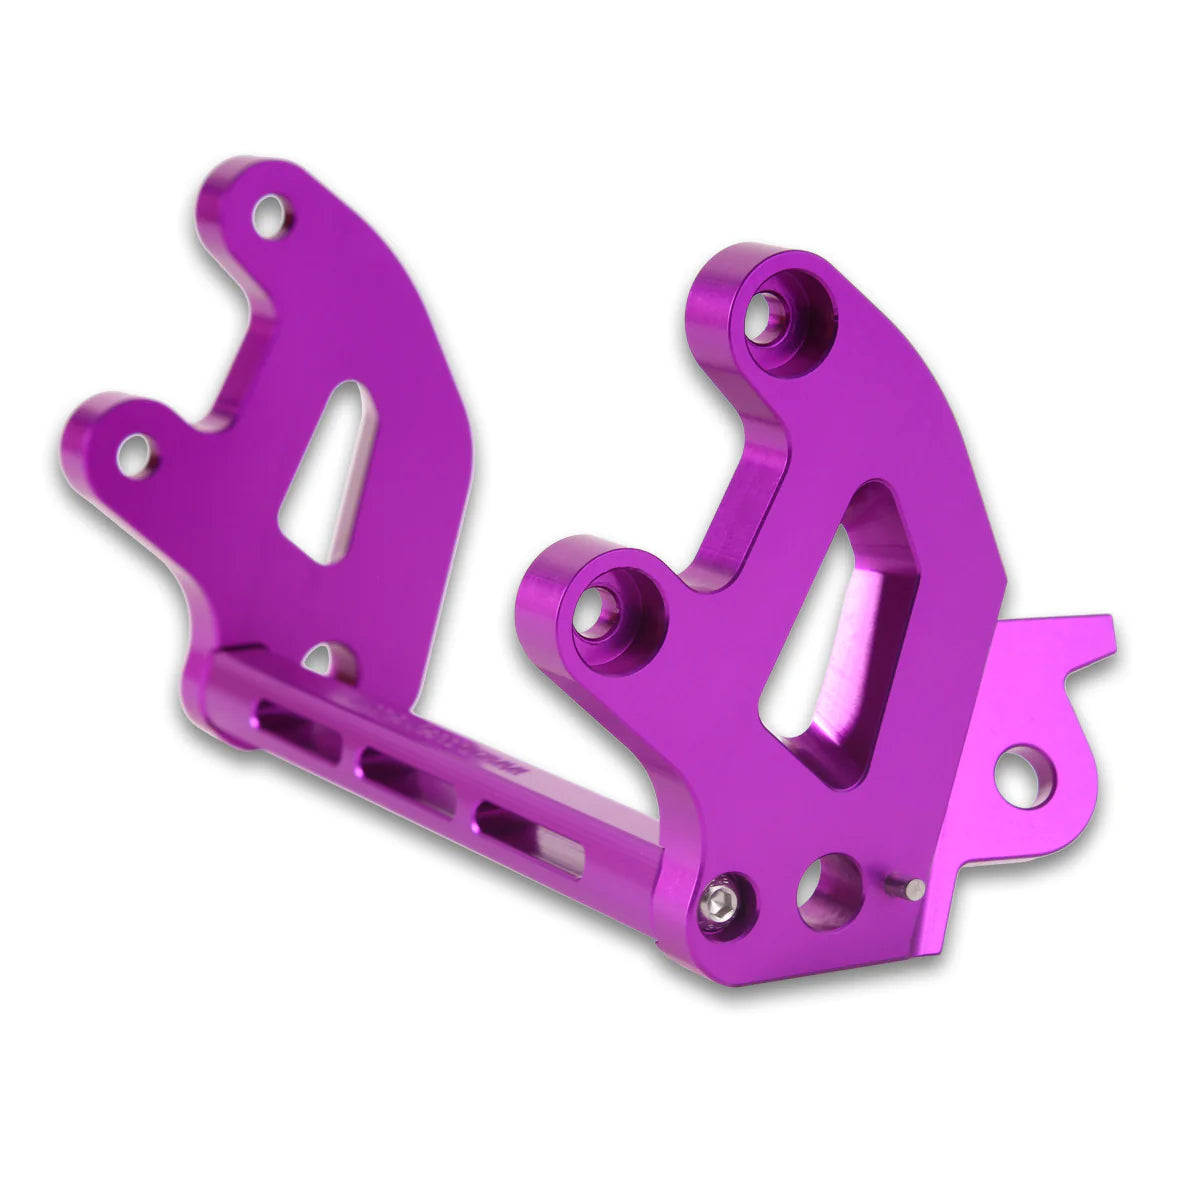 Lowering Peg Bracket Set With Kickstand Option and Support Brace